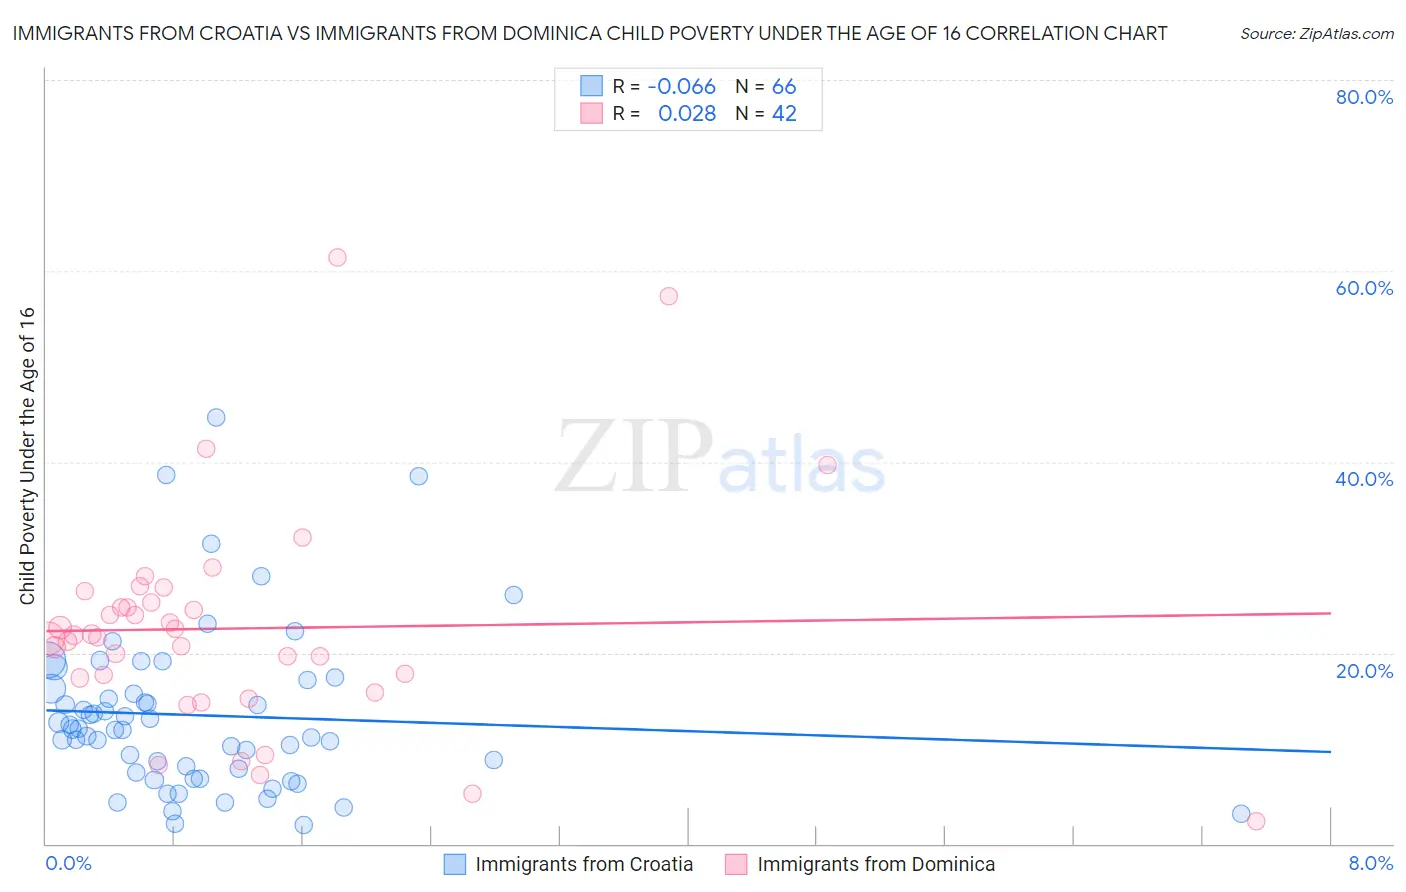 Immigrants from Croatia vs Immigrants from Dominica Child Poverty Under the Age of 16